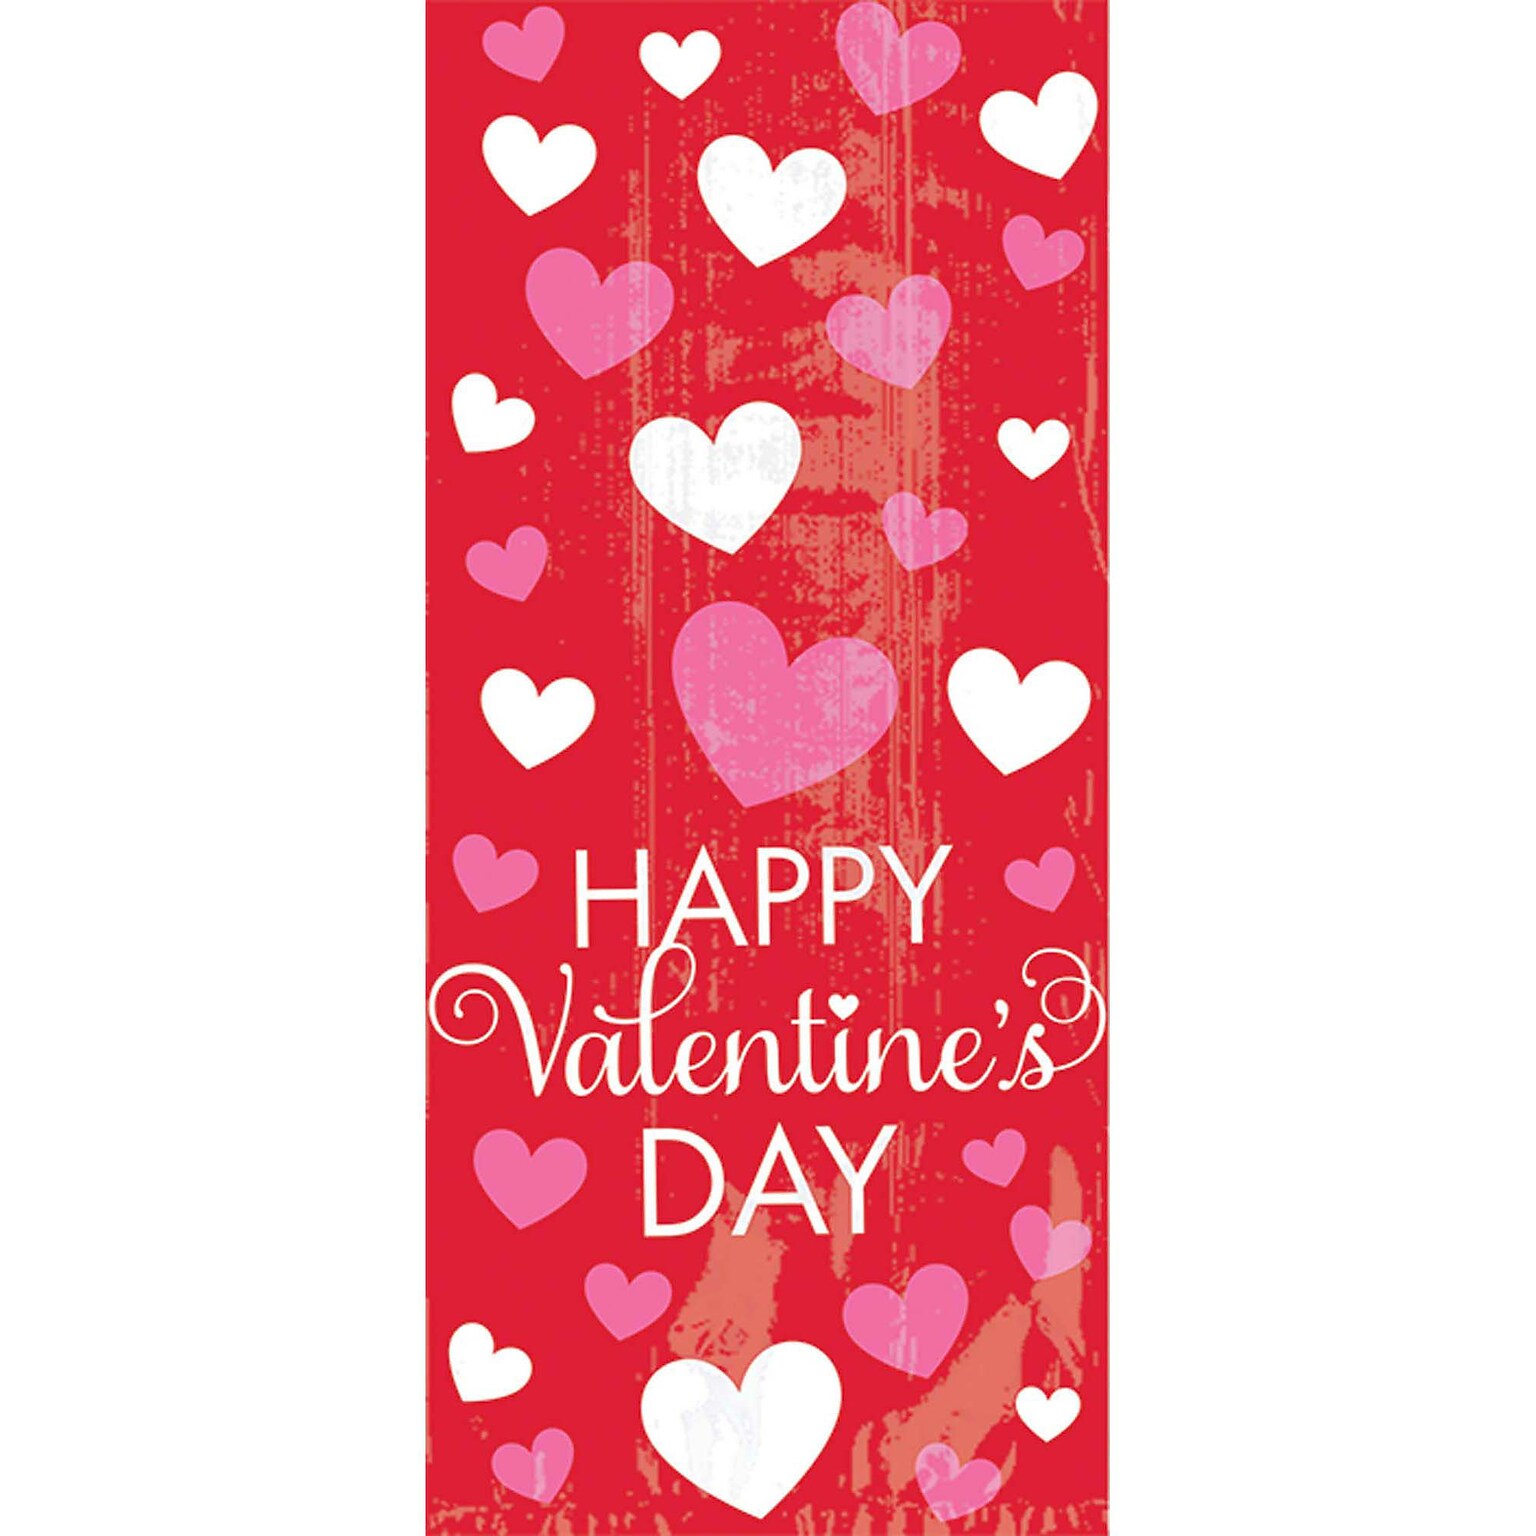 Amscan Happy Valentines Day Small Cello Bag, 9.5 x 4 x 2.25, 7/Pack, 20 Per Pack (370211)